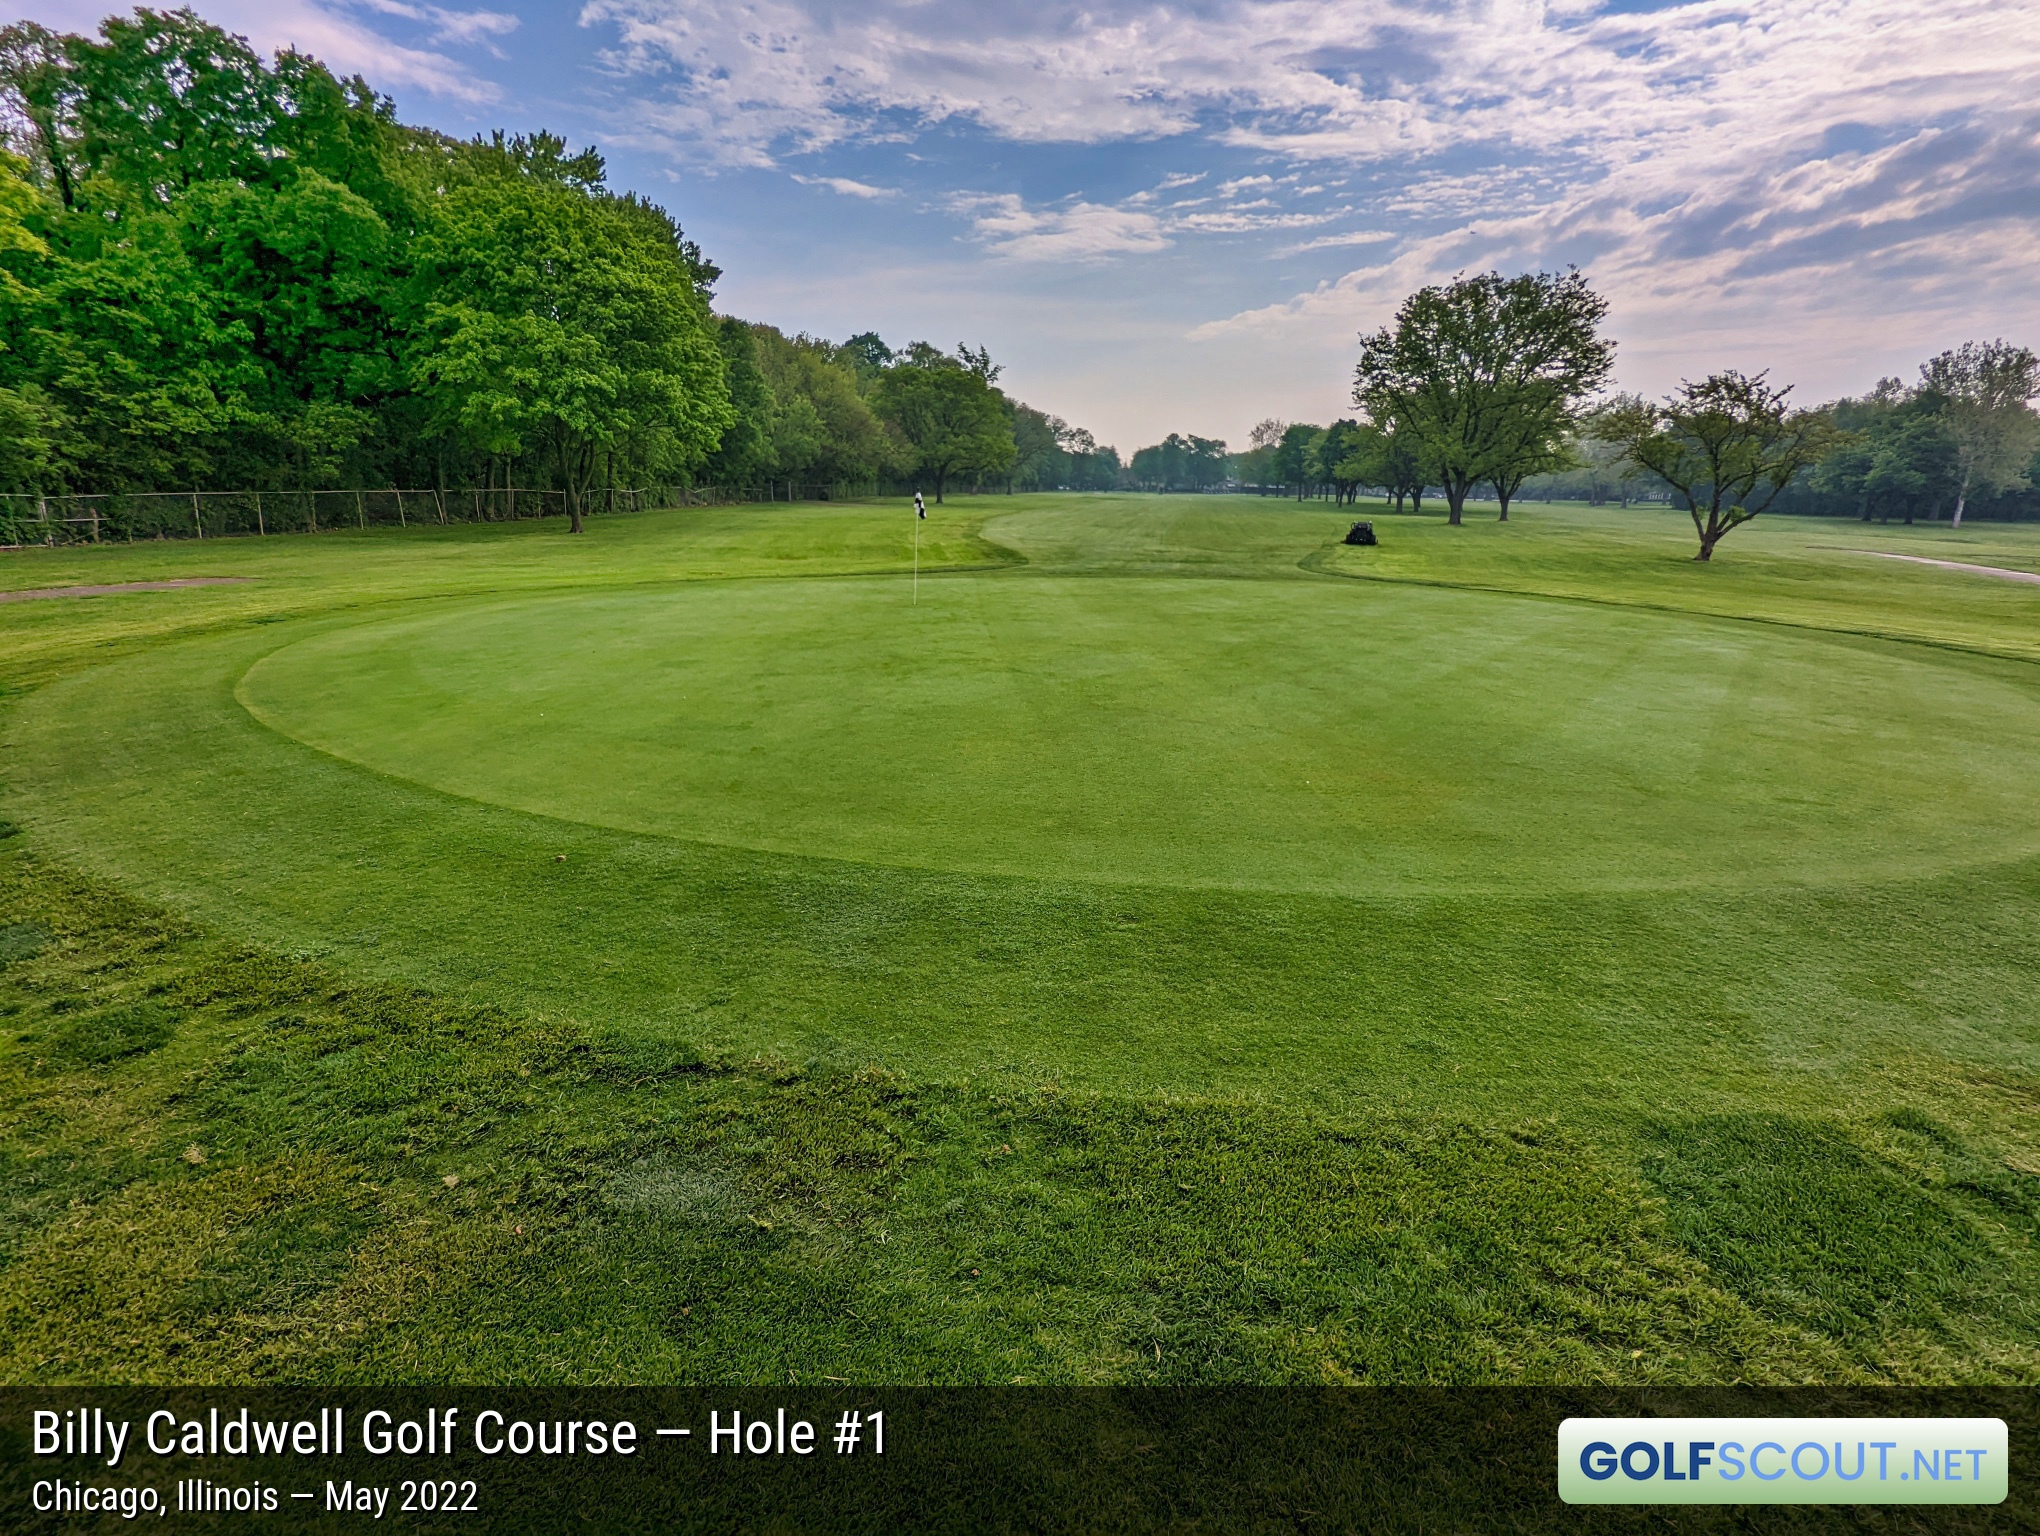 Photo of hole #1 at Billy Caldwell Golf Course in Chicago, Illinois. A view of the fairway from the back of the green.